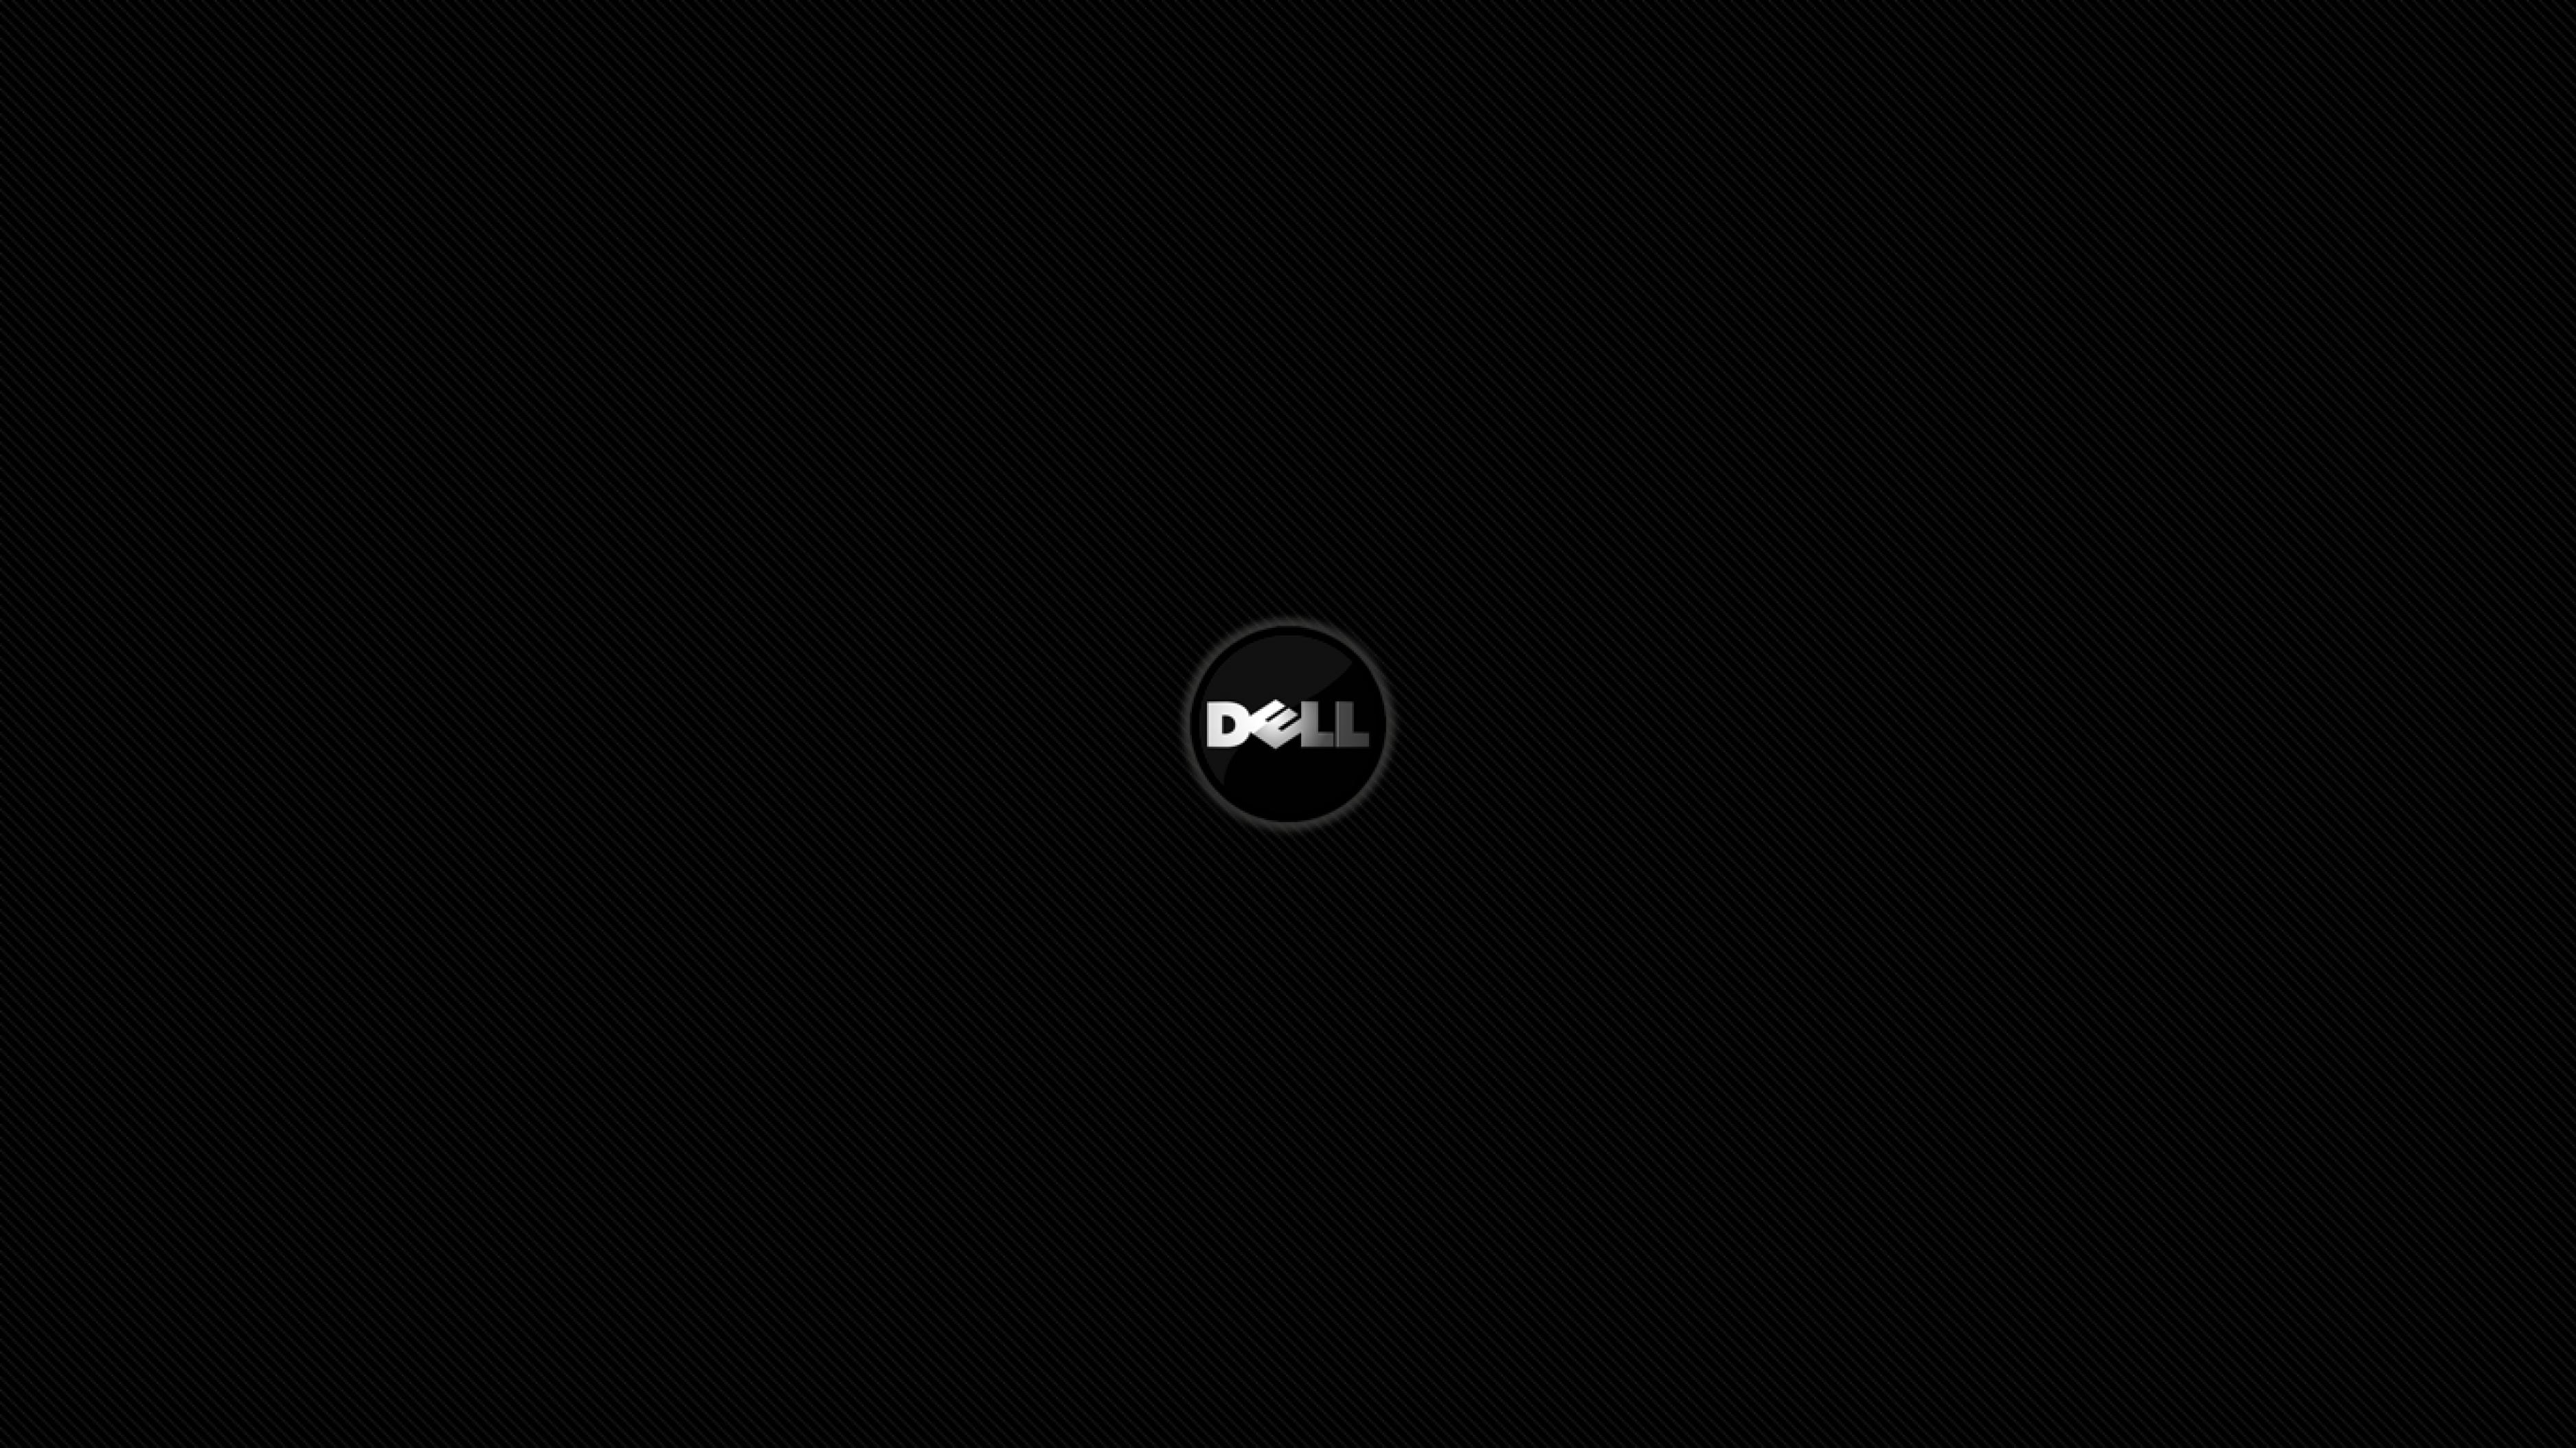 Dell Background For Your